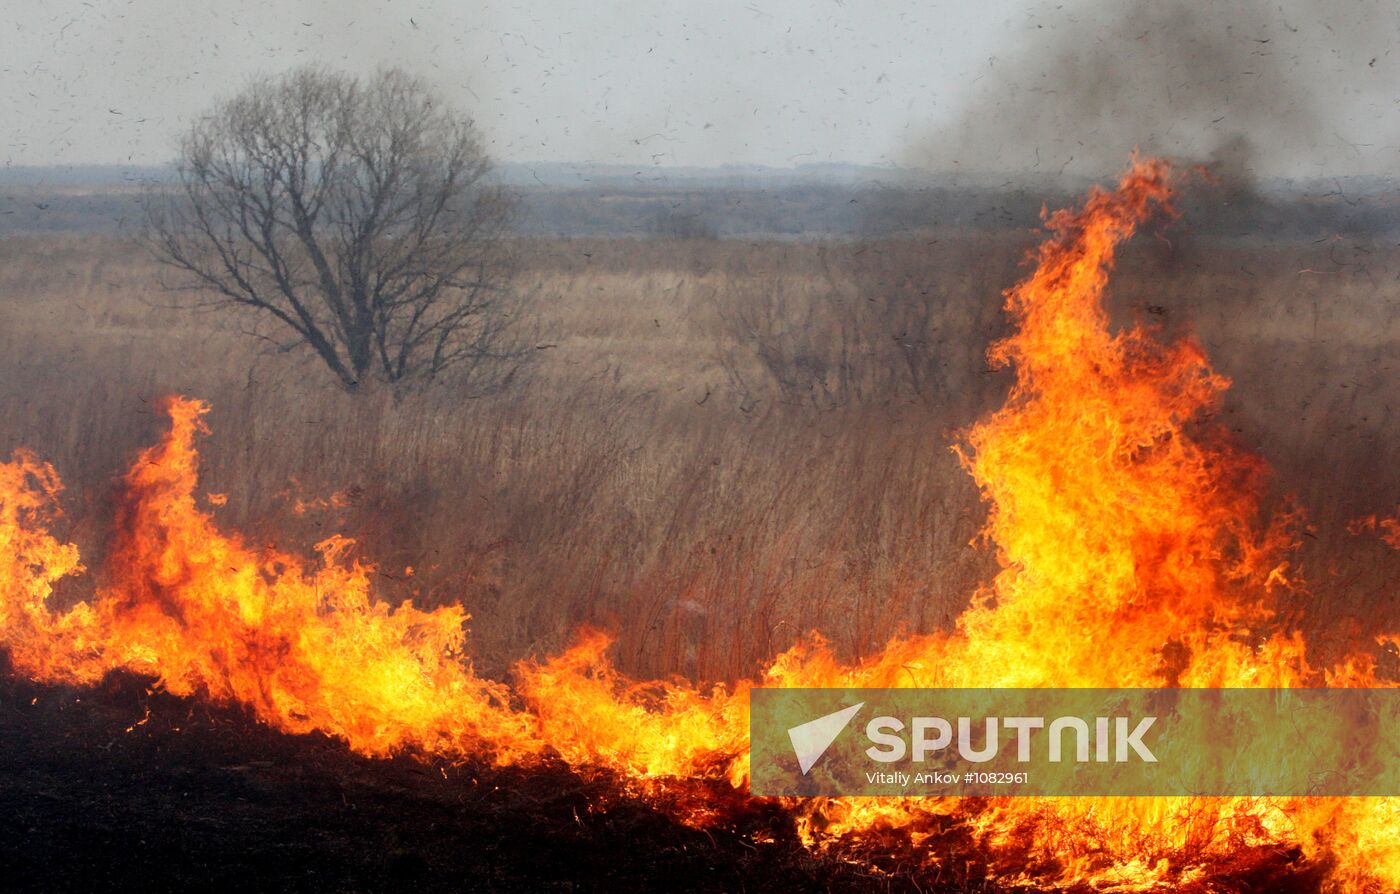 Burning dead grass in Oktyabrsky District, Primorye Territory